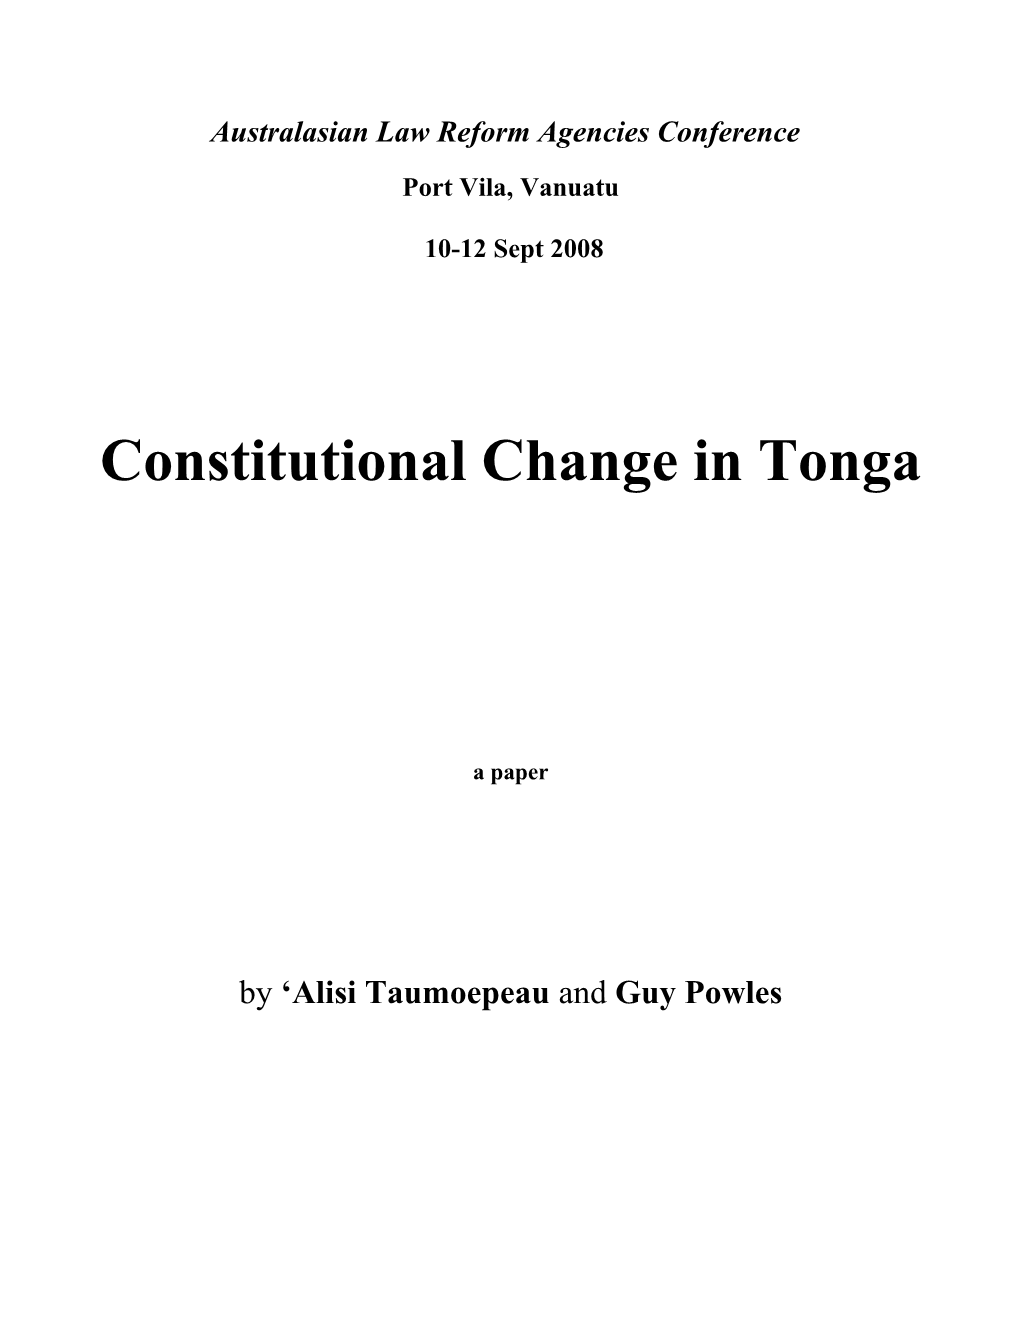 Constitutional Change in Tonga